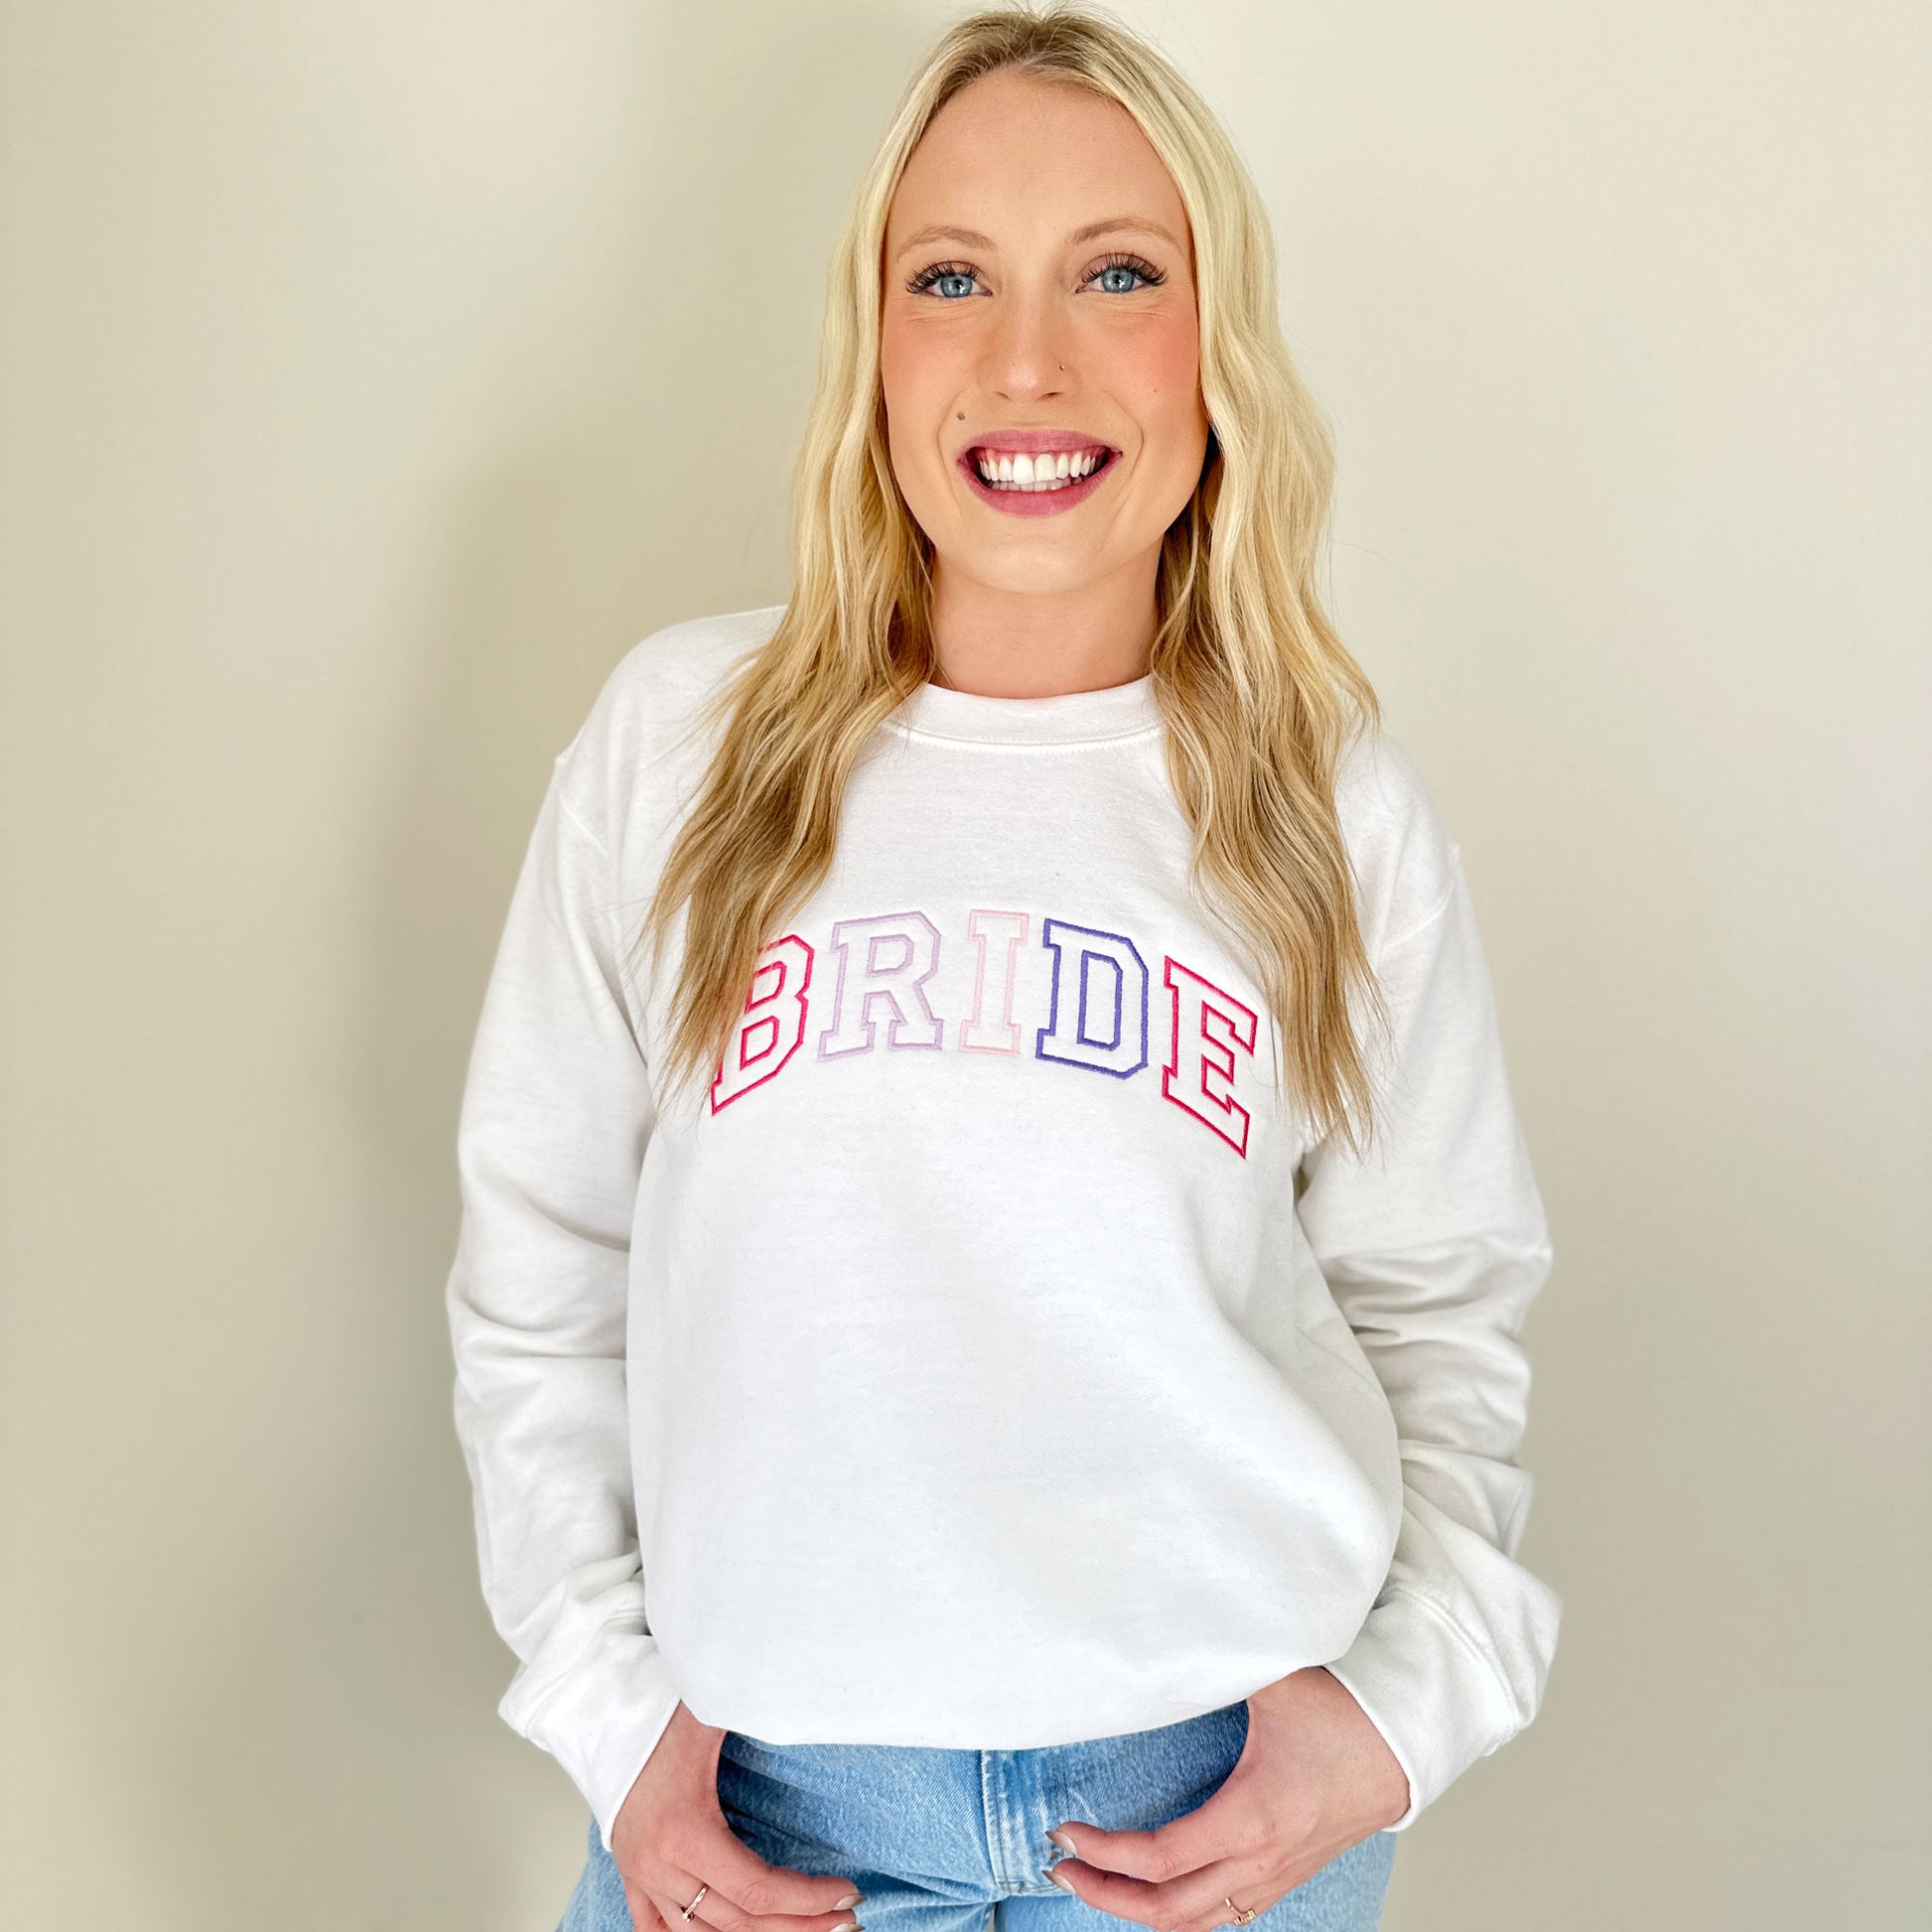 woman wearing a white pullover sweatshirt with purple and pink embroidered BRIDE design across the chest